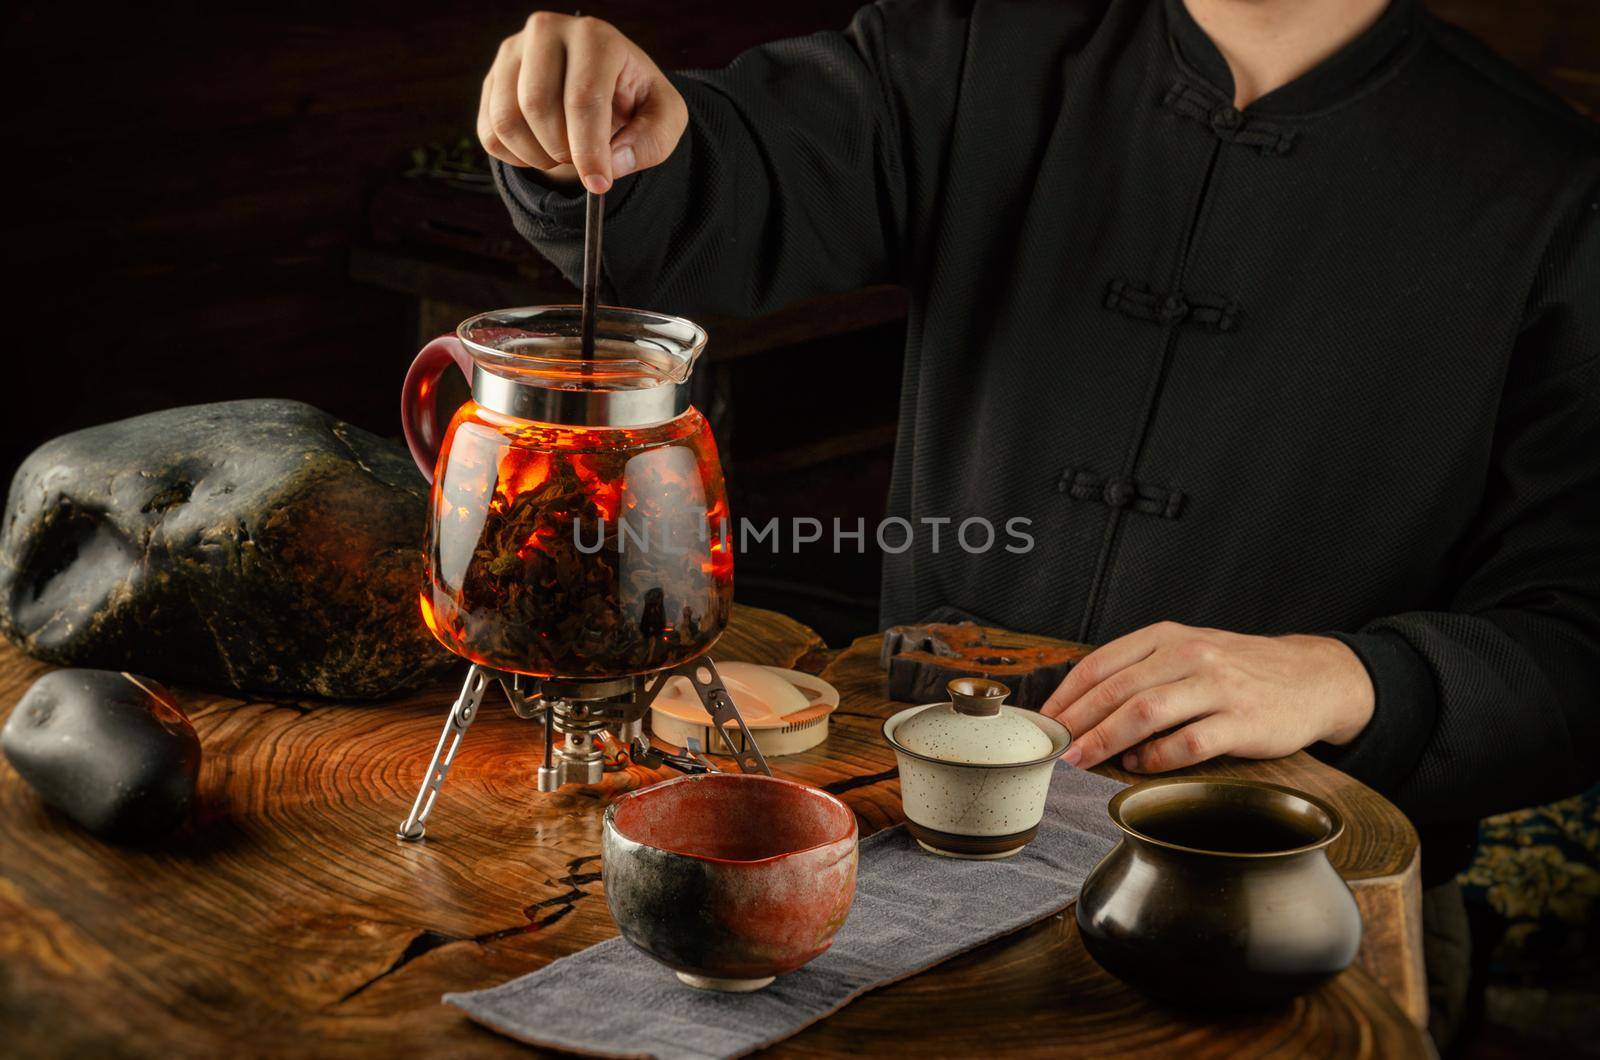 the tea ceremony brewing tea on fire in a glass teapot